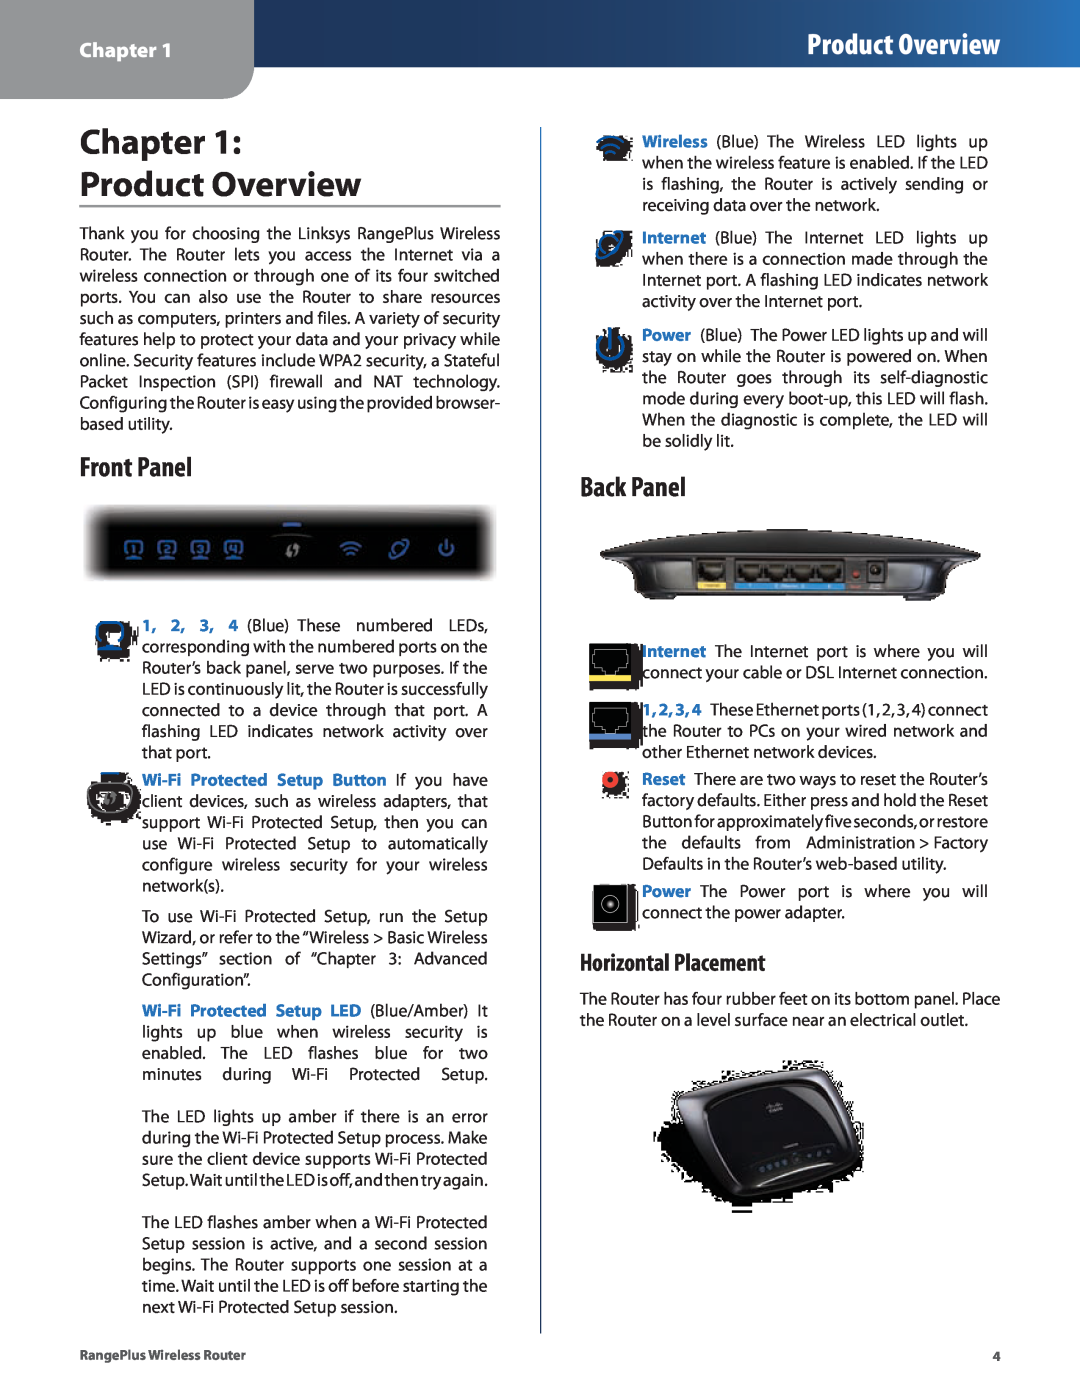 Cisco Systems WRT110 manual Chapter Product Overview, Front Panel, Back Panel, Horizontal Placement 